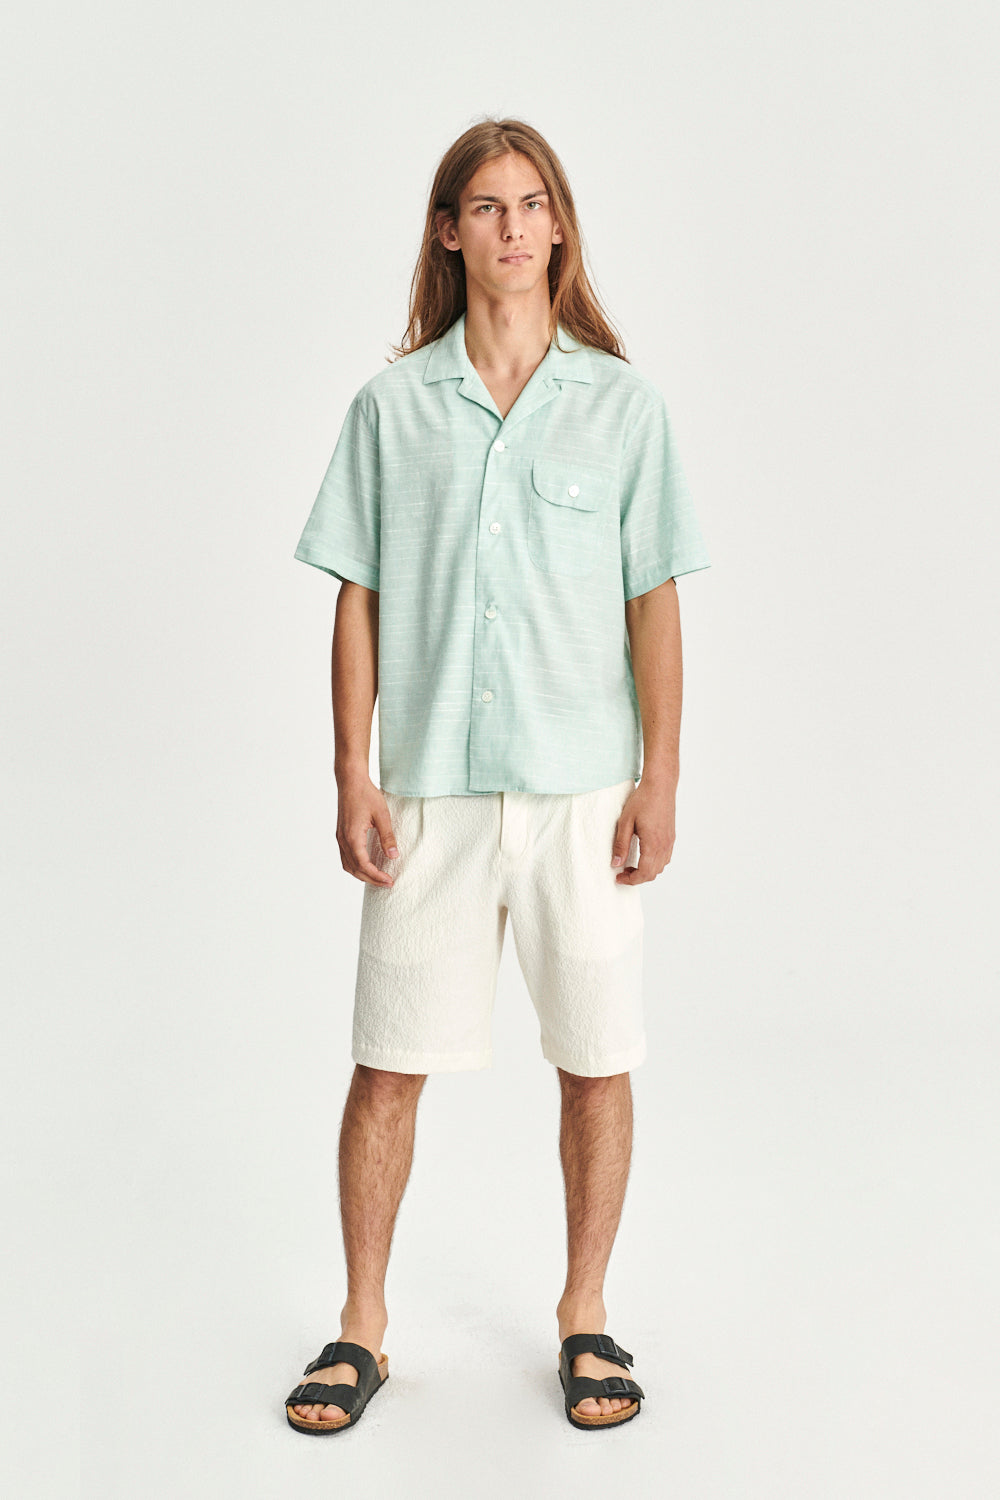 Short Sleeve Camp Collar Shirt in a Subtle Mint Green Mix of Portuguese Cotton, Linen and Pineapple